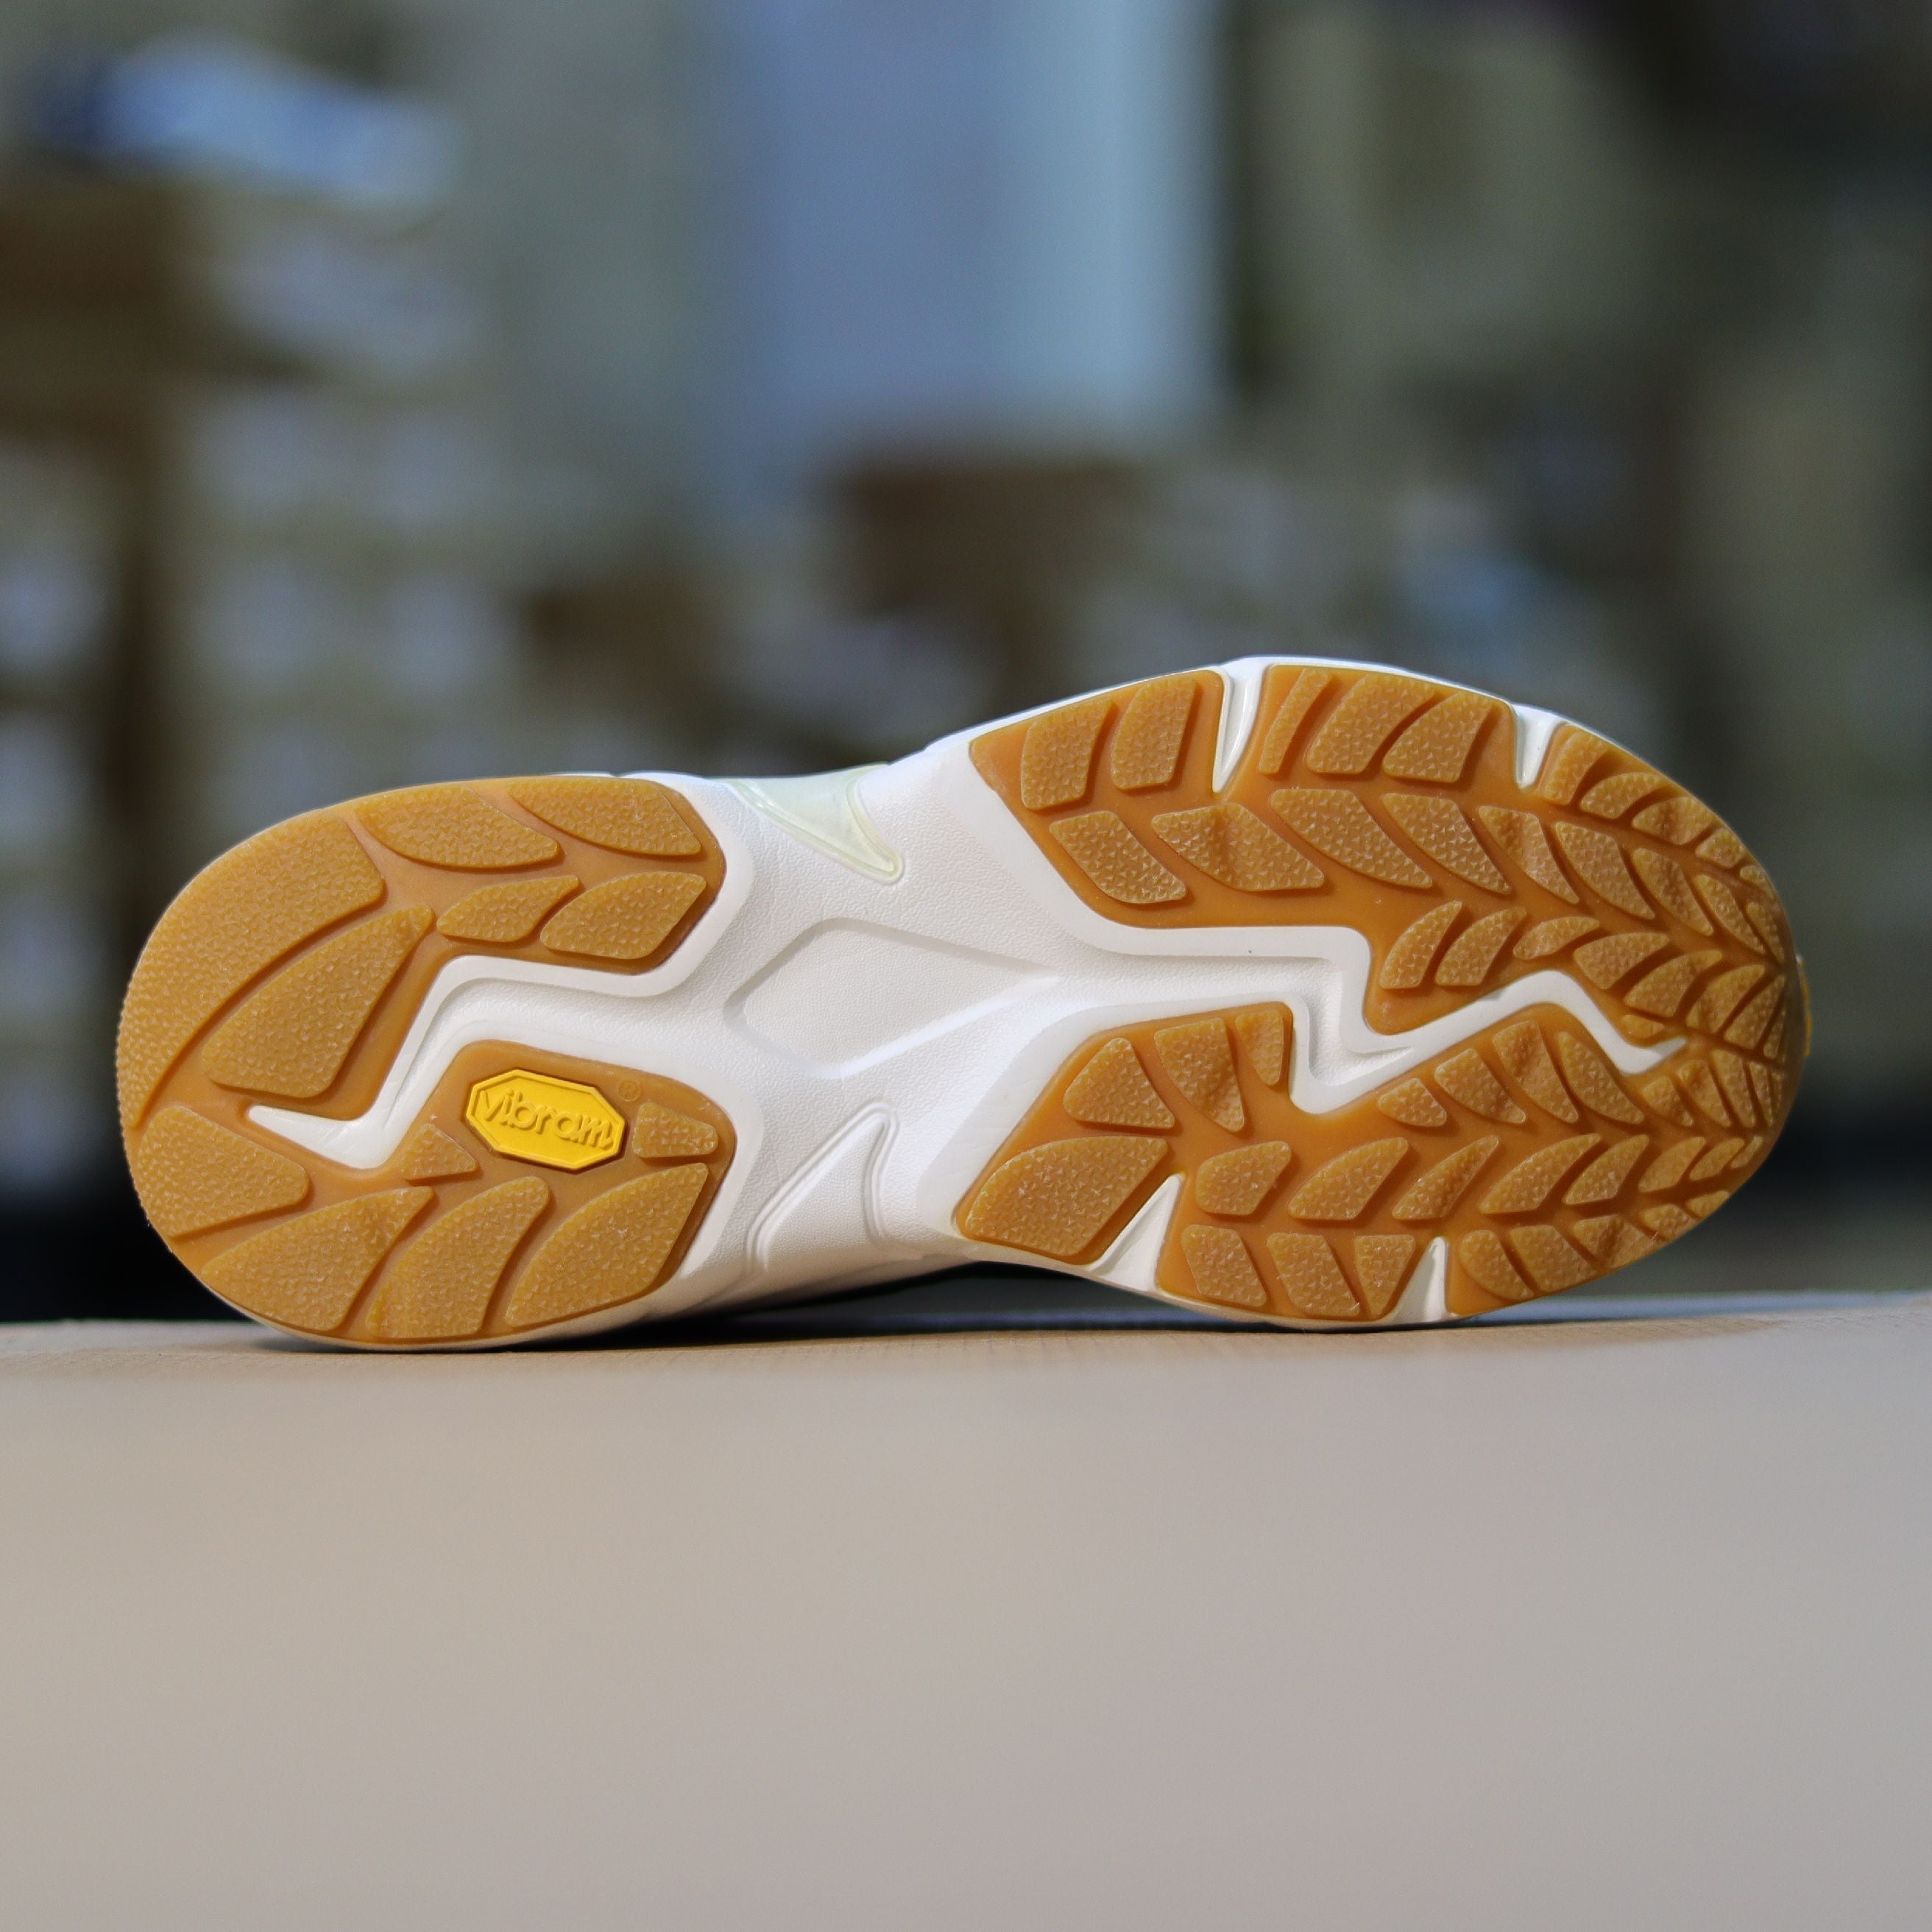 X14 - Vibram® Urban Ankle Shoes by Xtep®